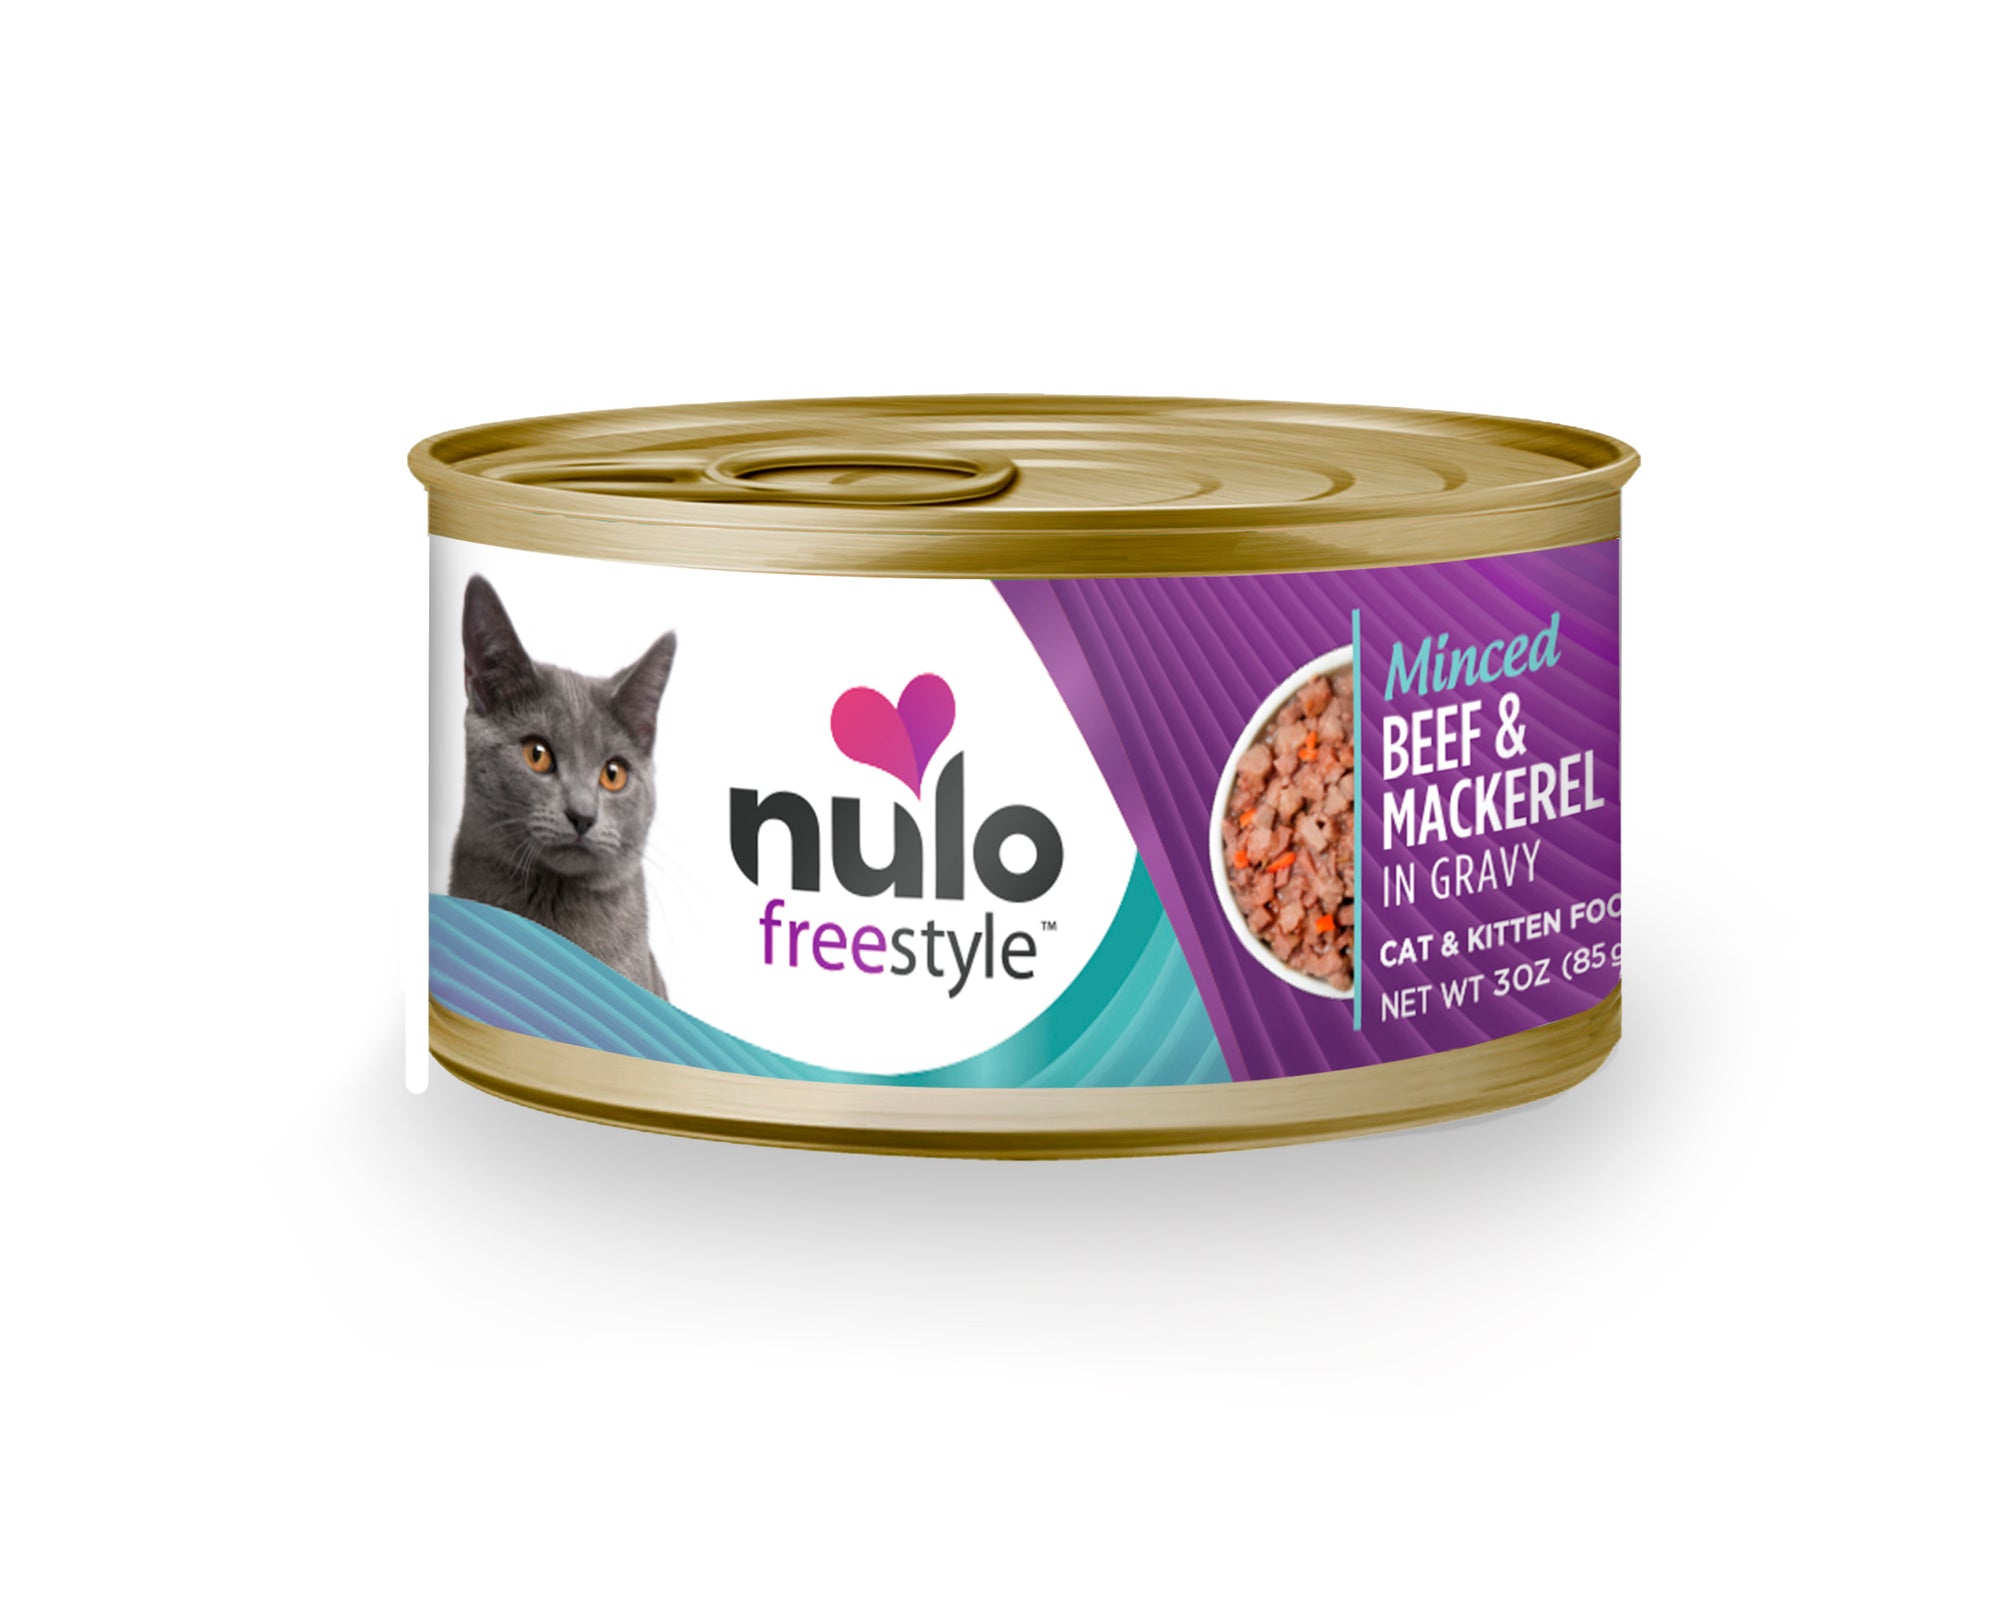 Nulo Freestyle Minced Beef & Mackerel Recipe in gravy for Cats